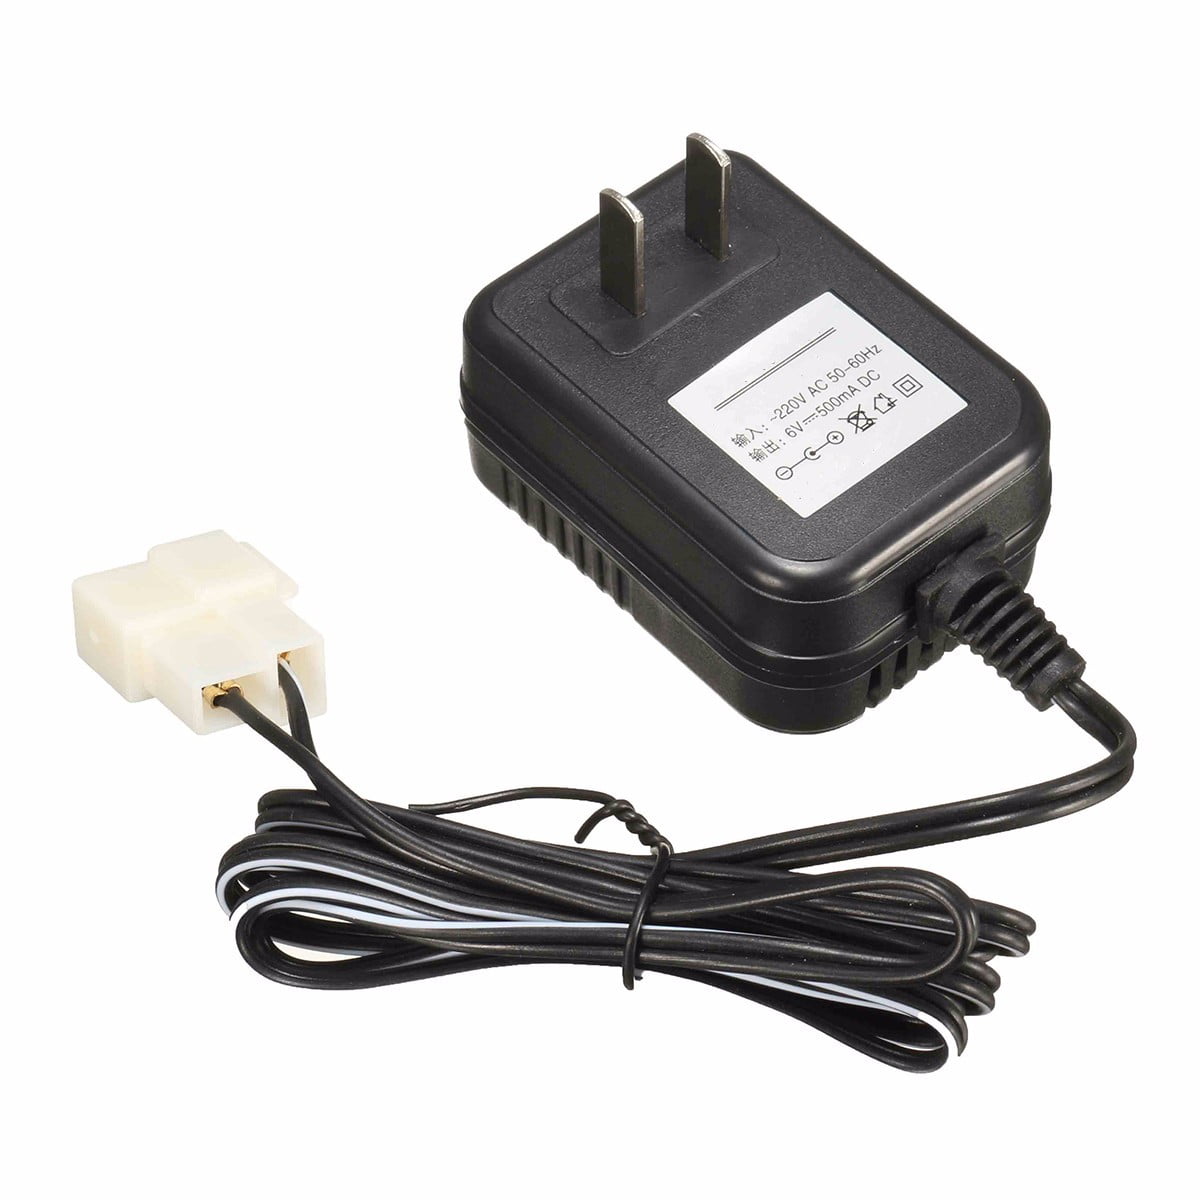 Details about   6V Wall Charger AC Adapter For Battery Powered Kid TRAX ATV Quad Ride On Car New 